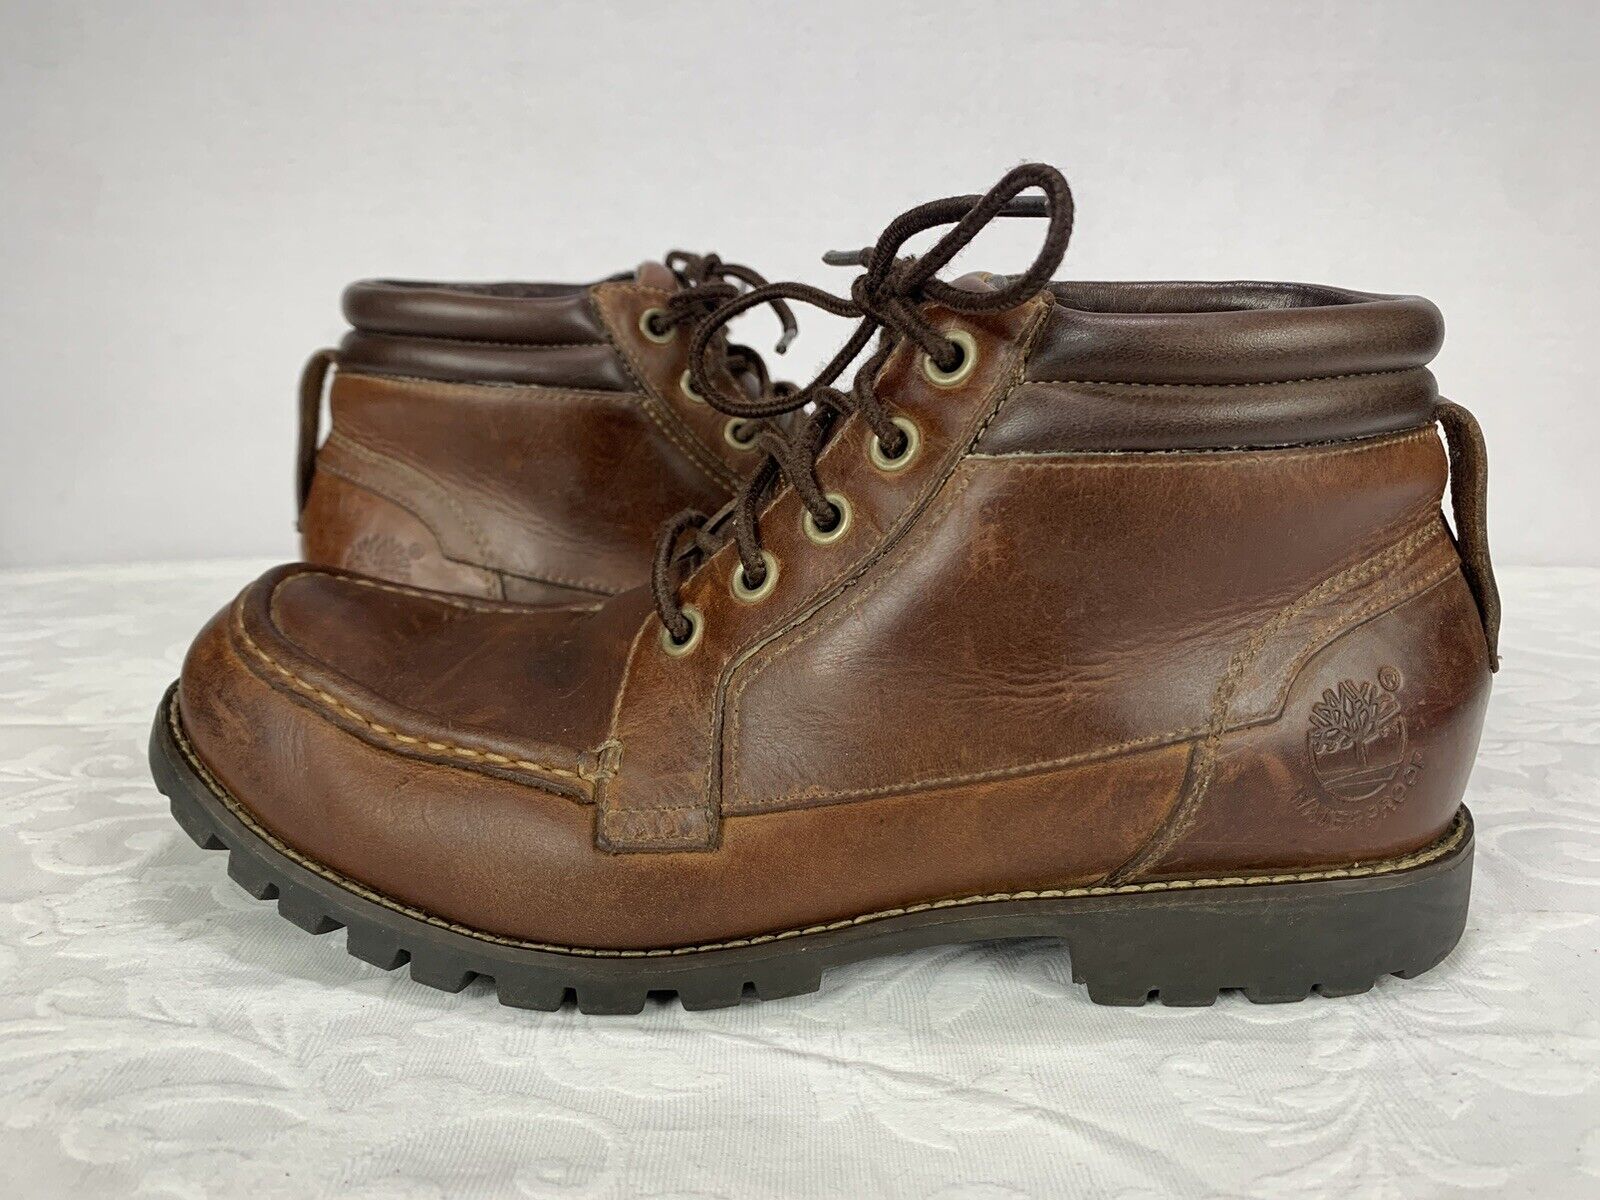 Timberland Brown Leather Earth Boots Waterproof 10 M #74132 Chukka No Liners